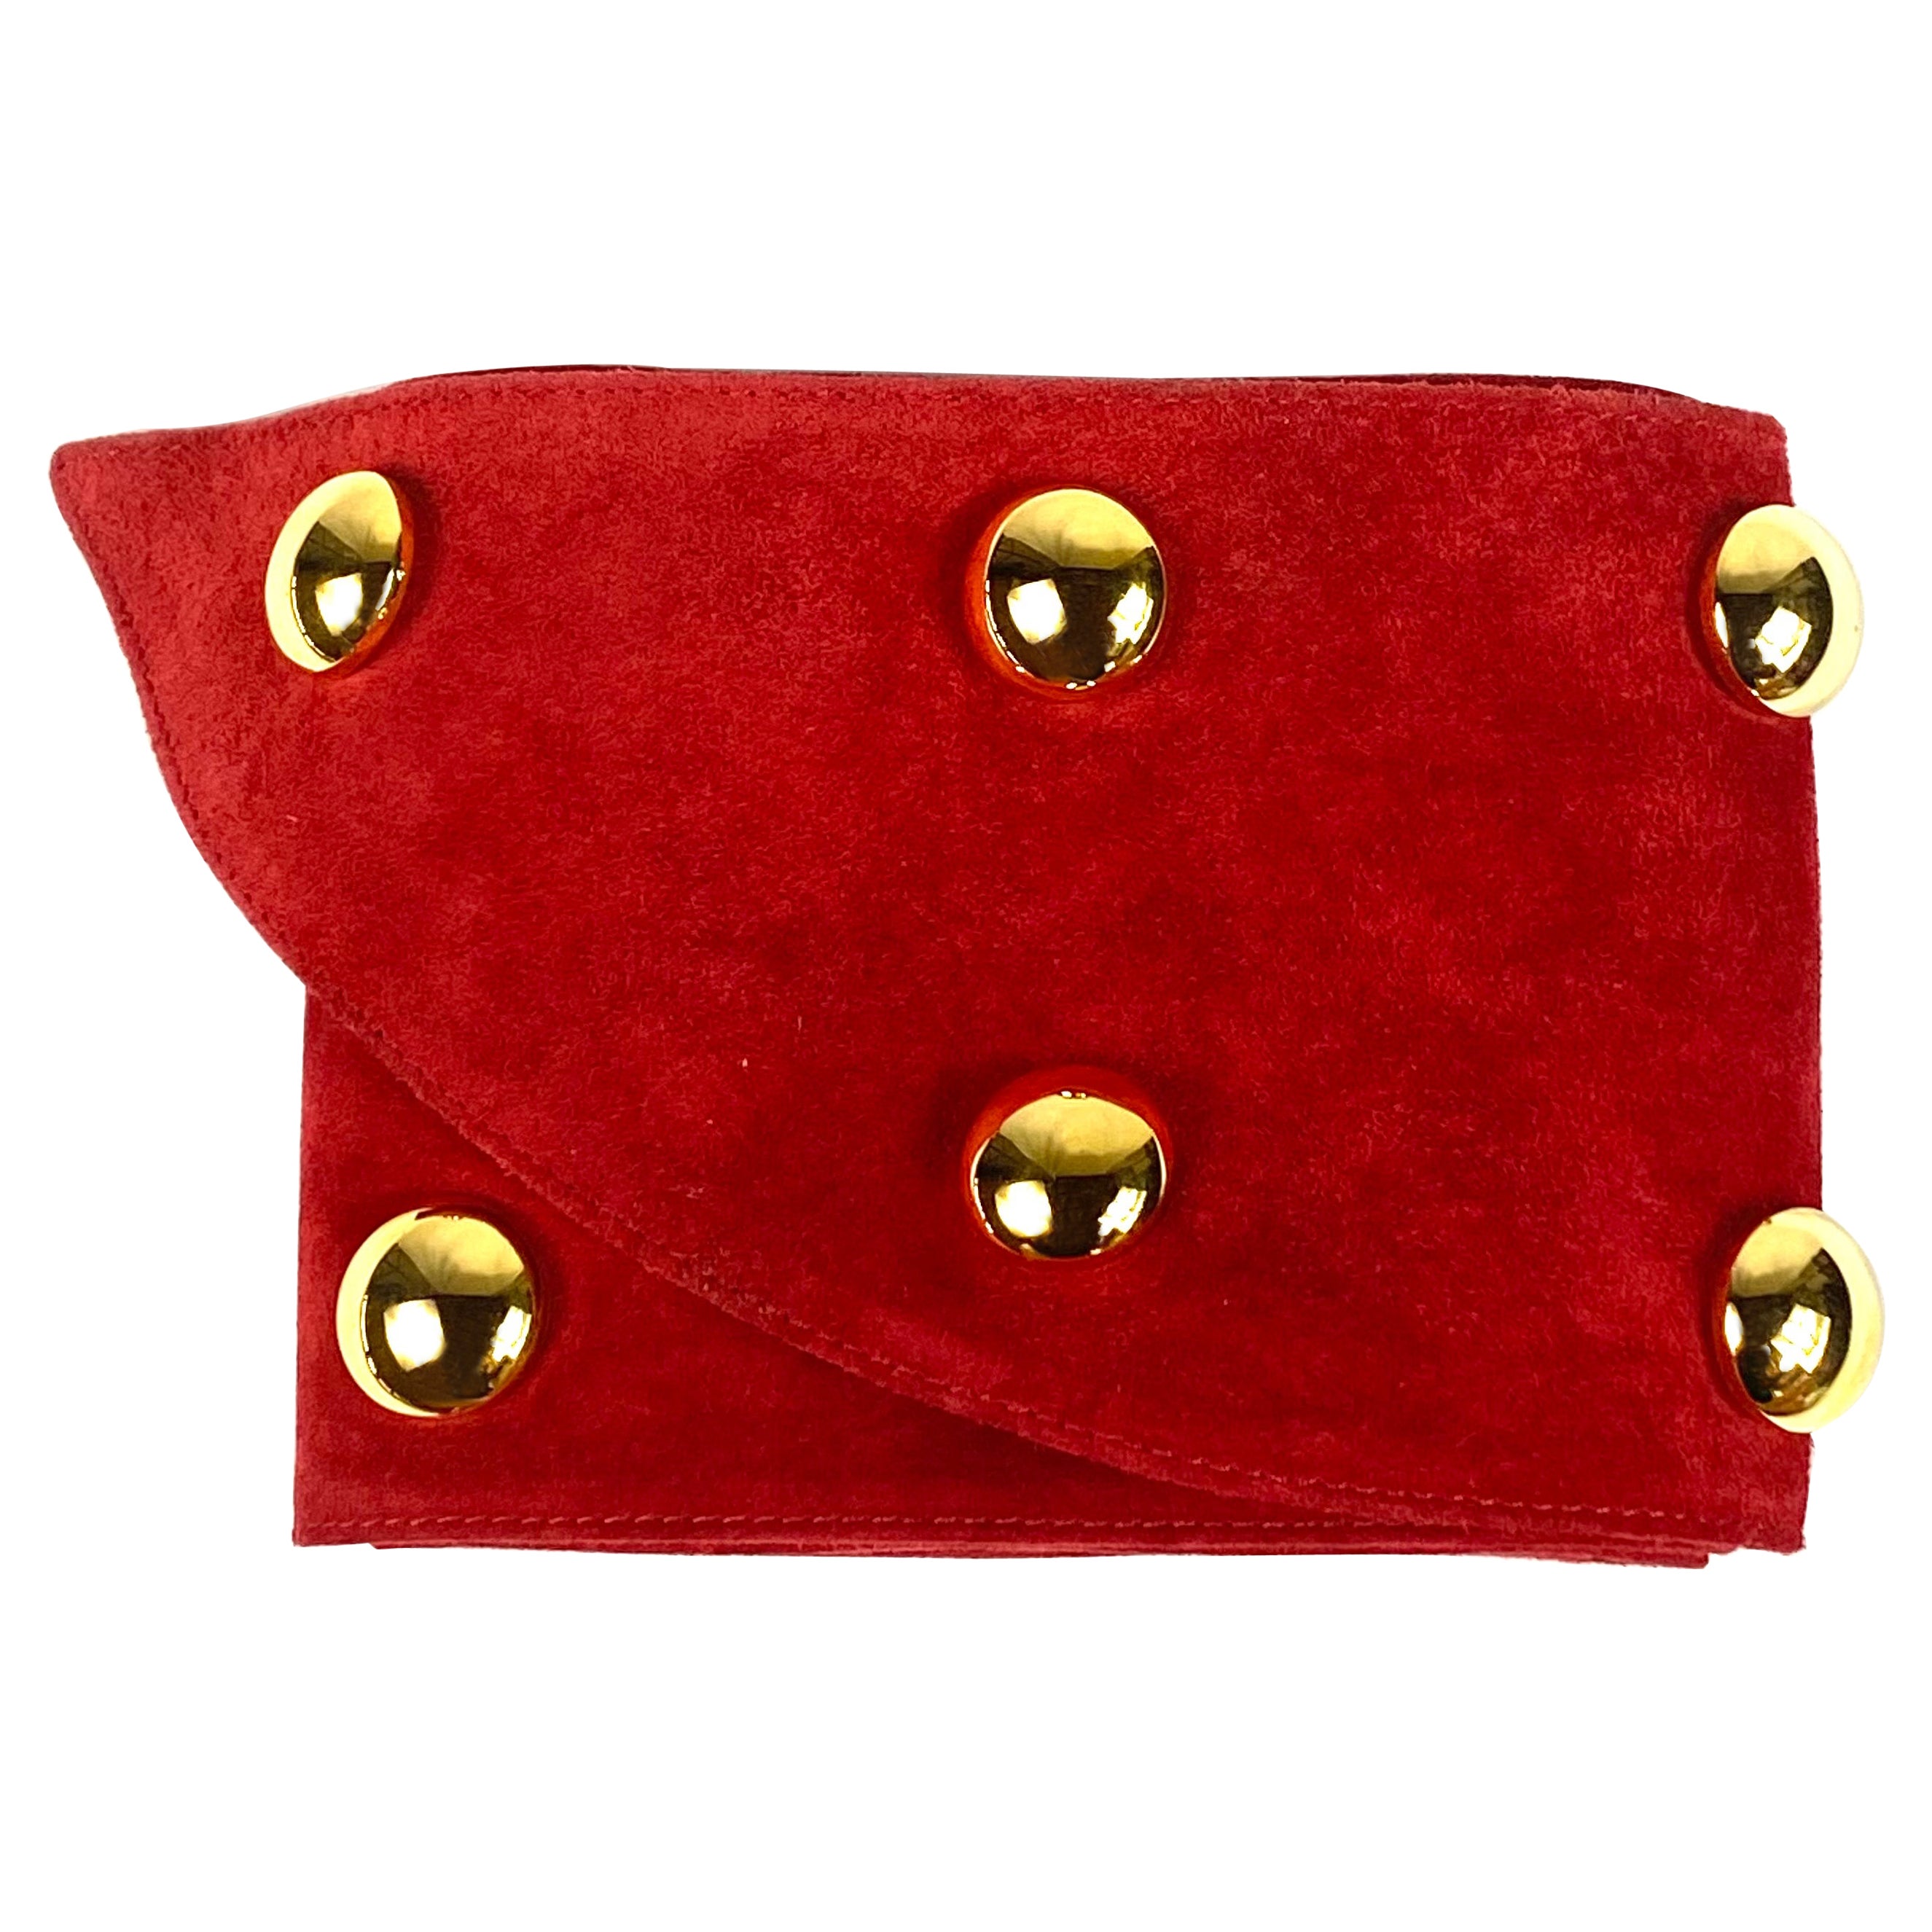 Yves Saint Laurent Rive Gauche Red and Gold Suede Wide Belt